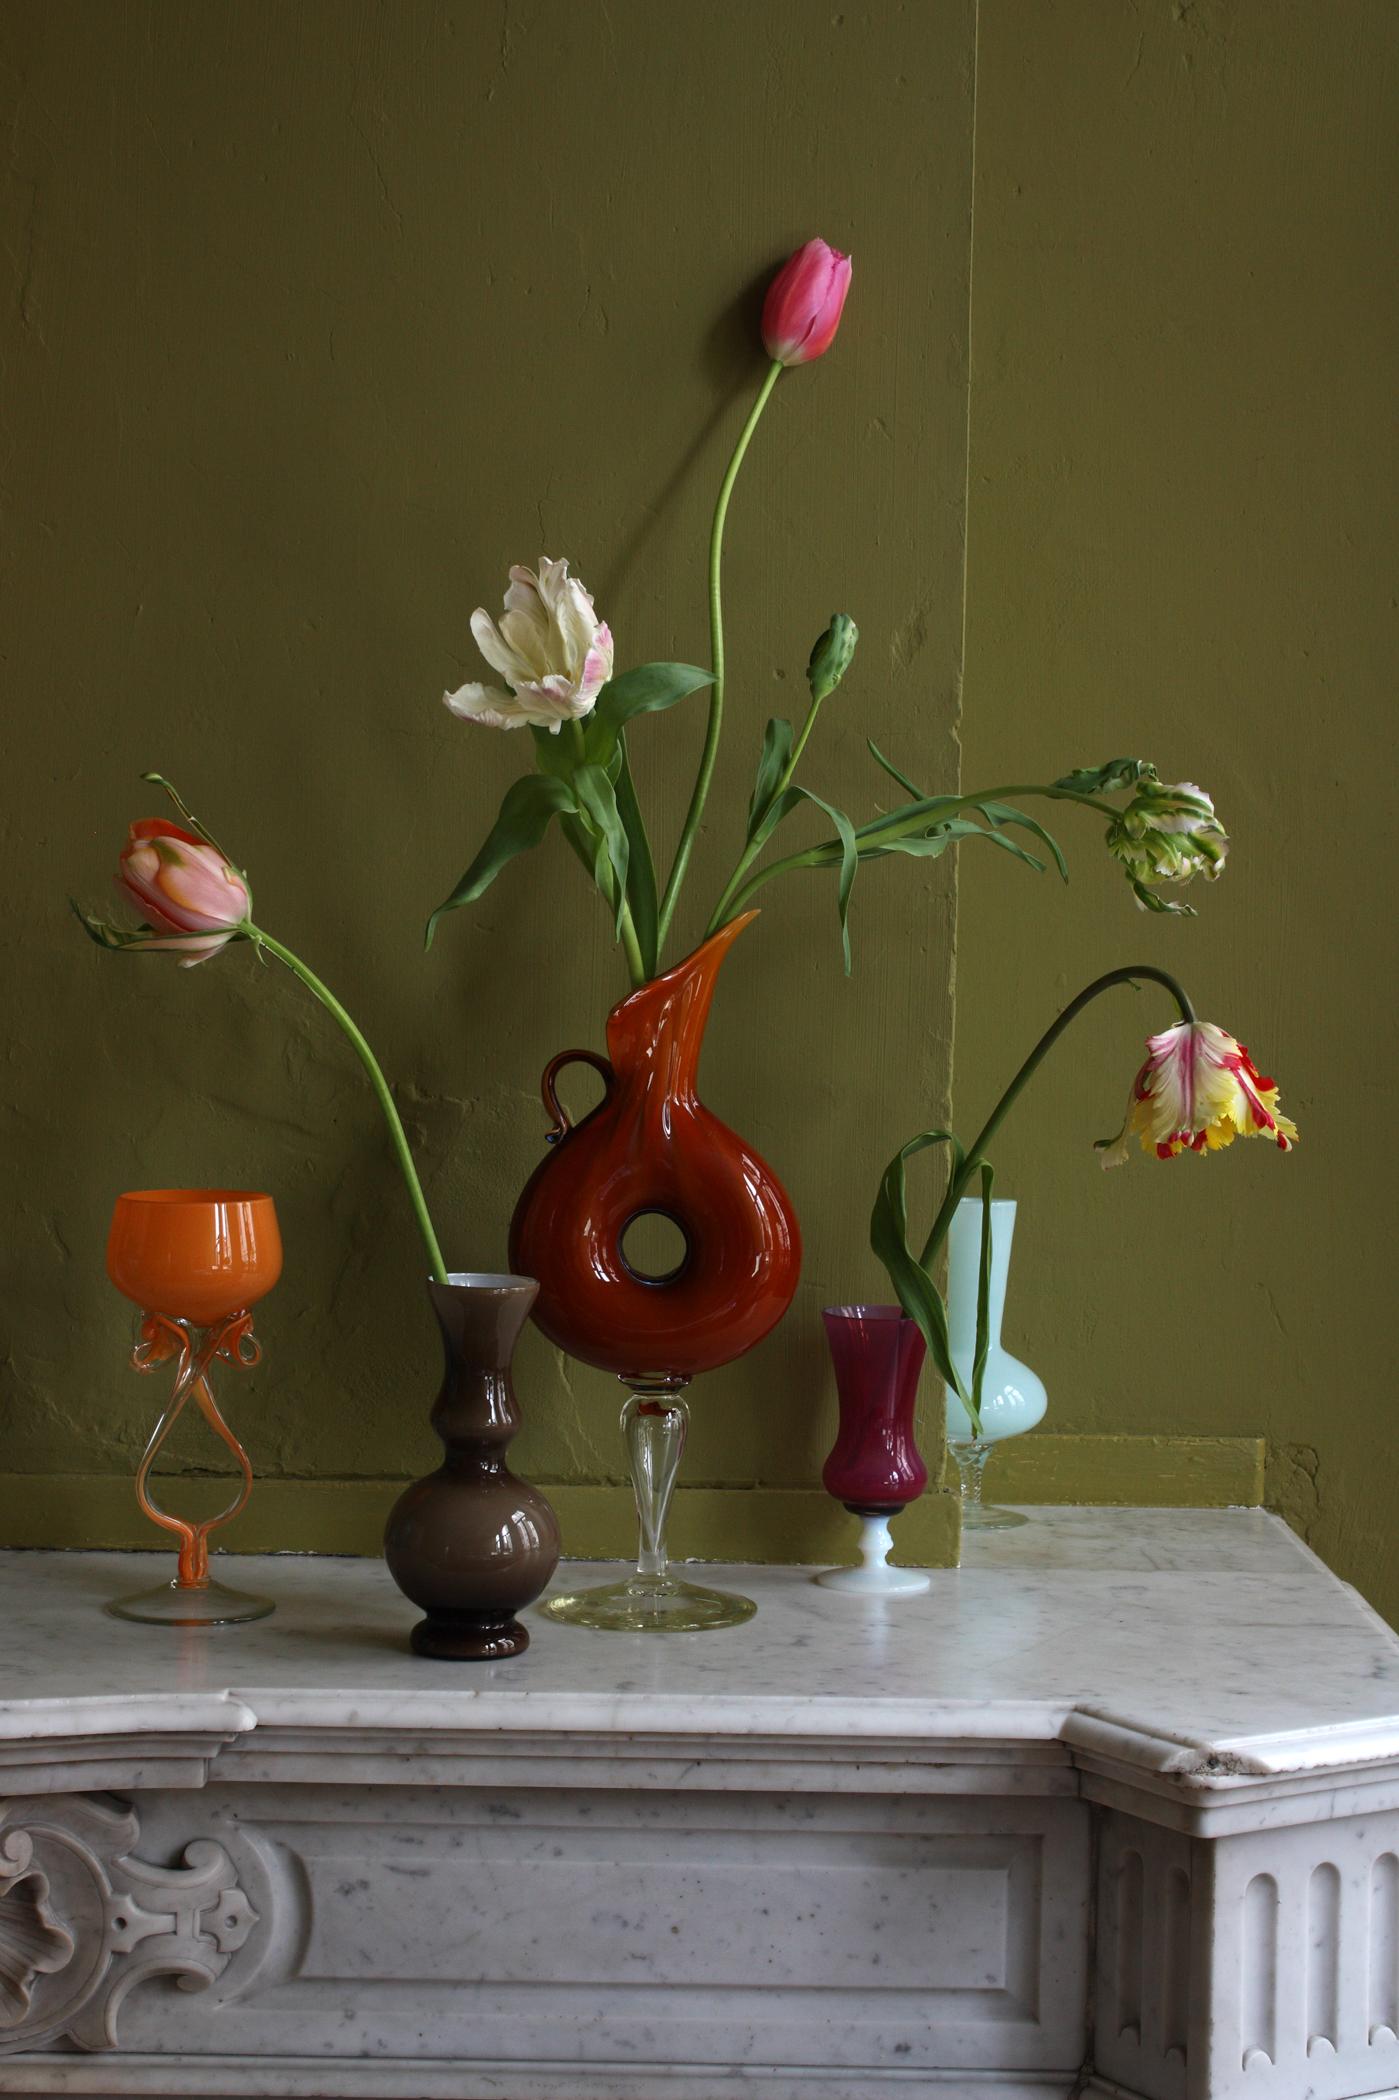 Michael James O’Brien Still-Life Photograph - Still Life with Tulips and 5 Opalina Vases, Antwerp. Color photograph